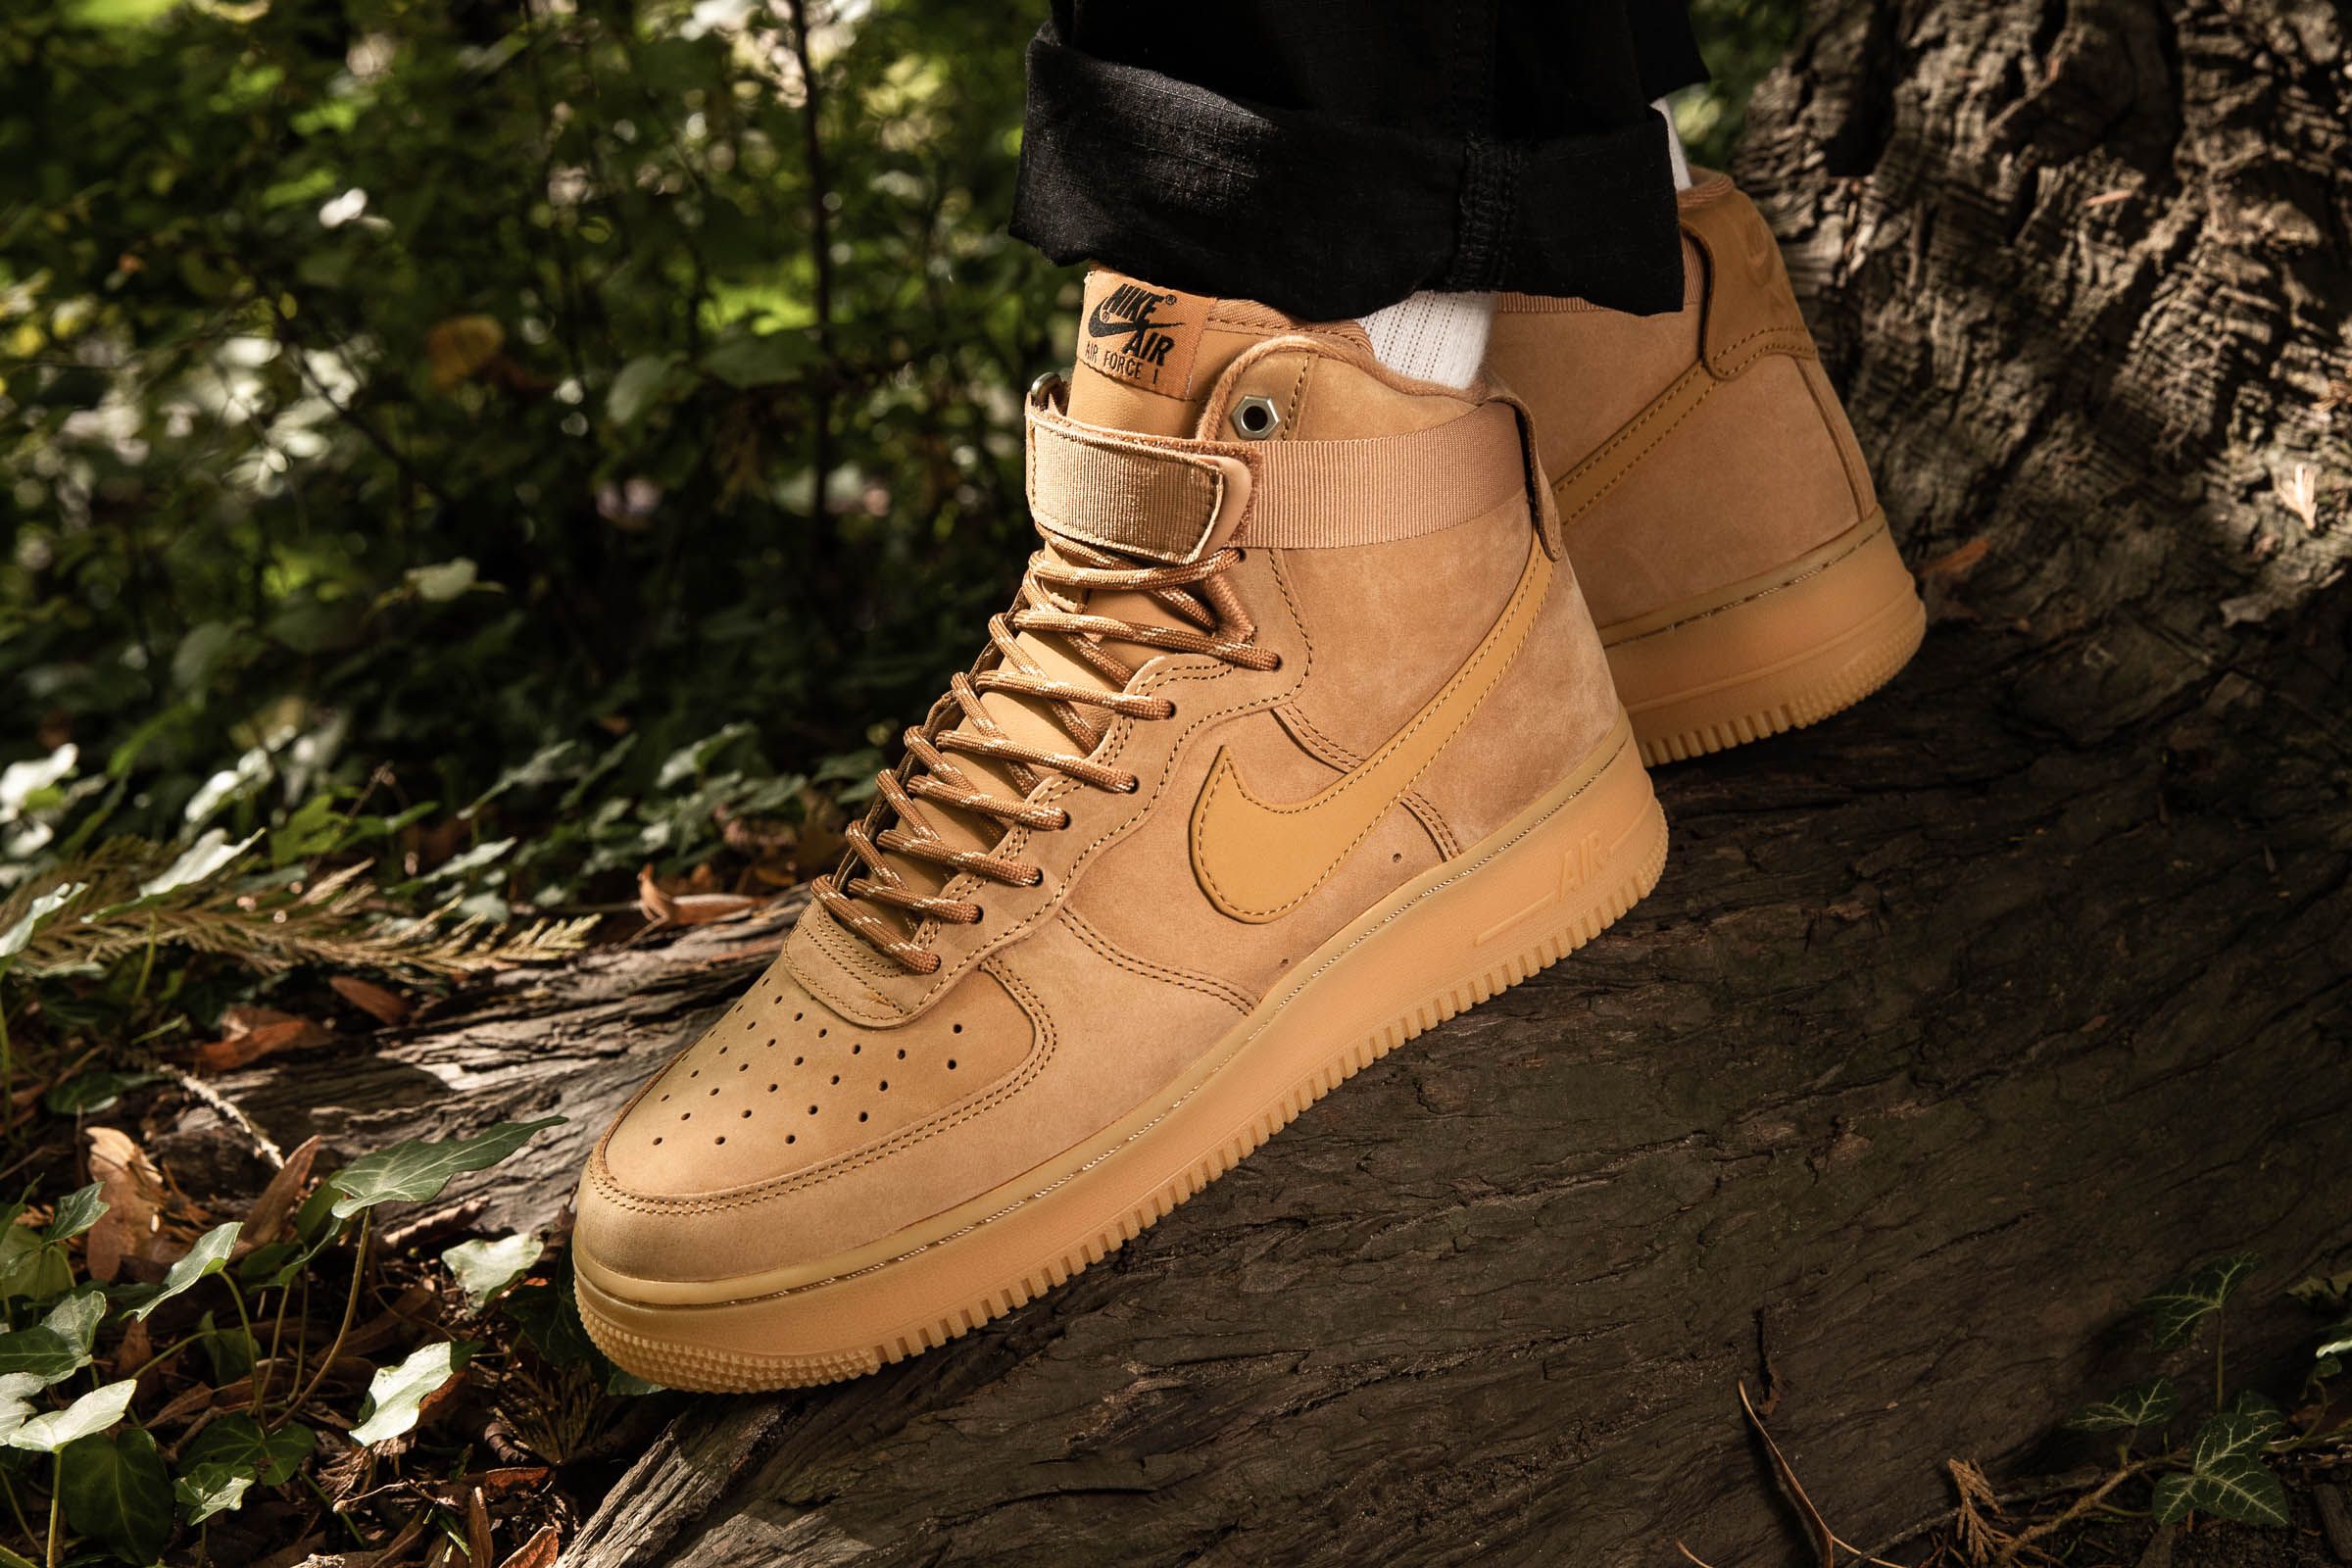 Titolo on X: "Nike Air Force 1 High "Wheat" 🍂🍃 Get Your Pair online ➡️  https://t.co/A7Y2zLzN7g US 7 (40) - US 12 (46)⁠ style code 🔎 CJ9178-200 # nike #af1 #airforce1 #titolo #titolostyle #